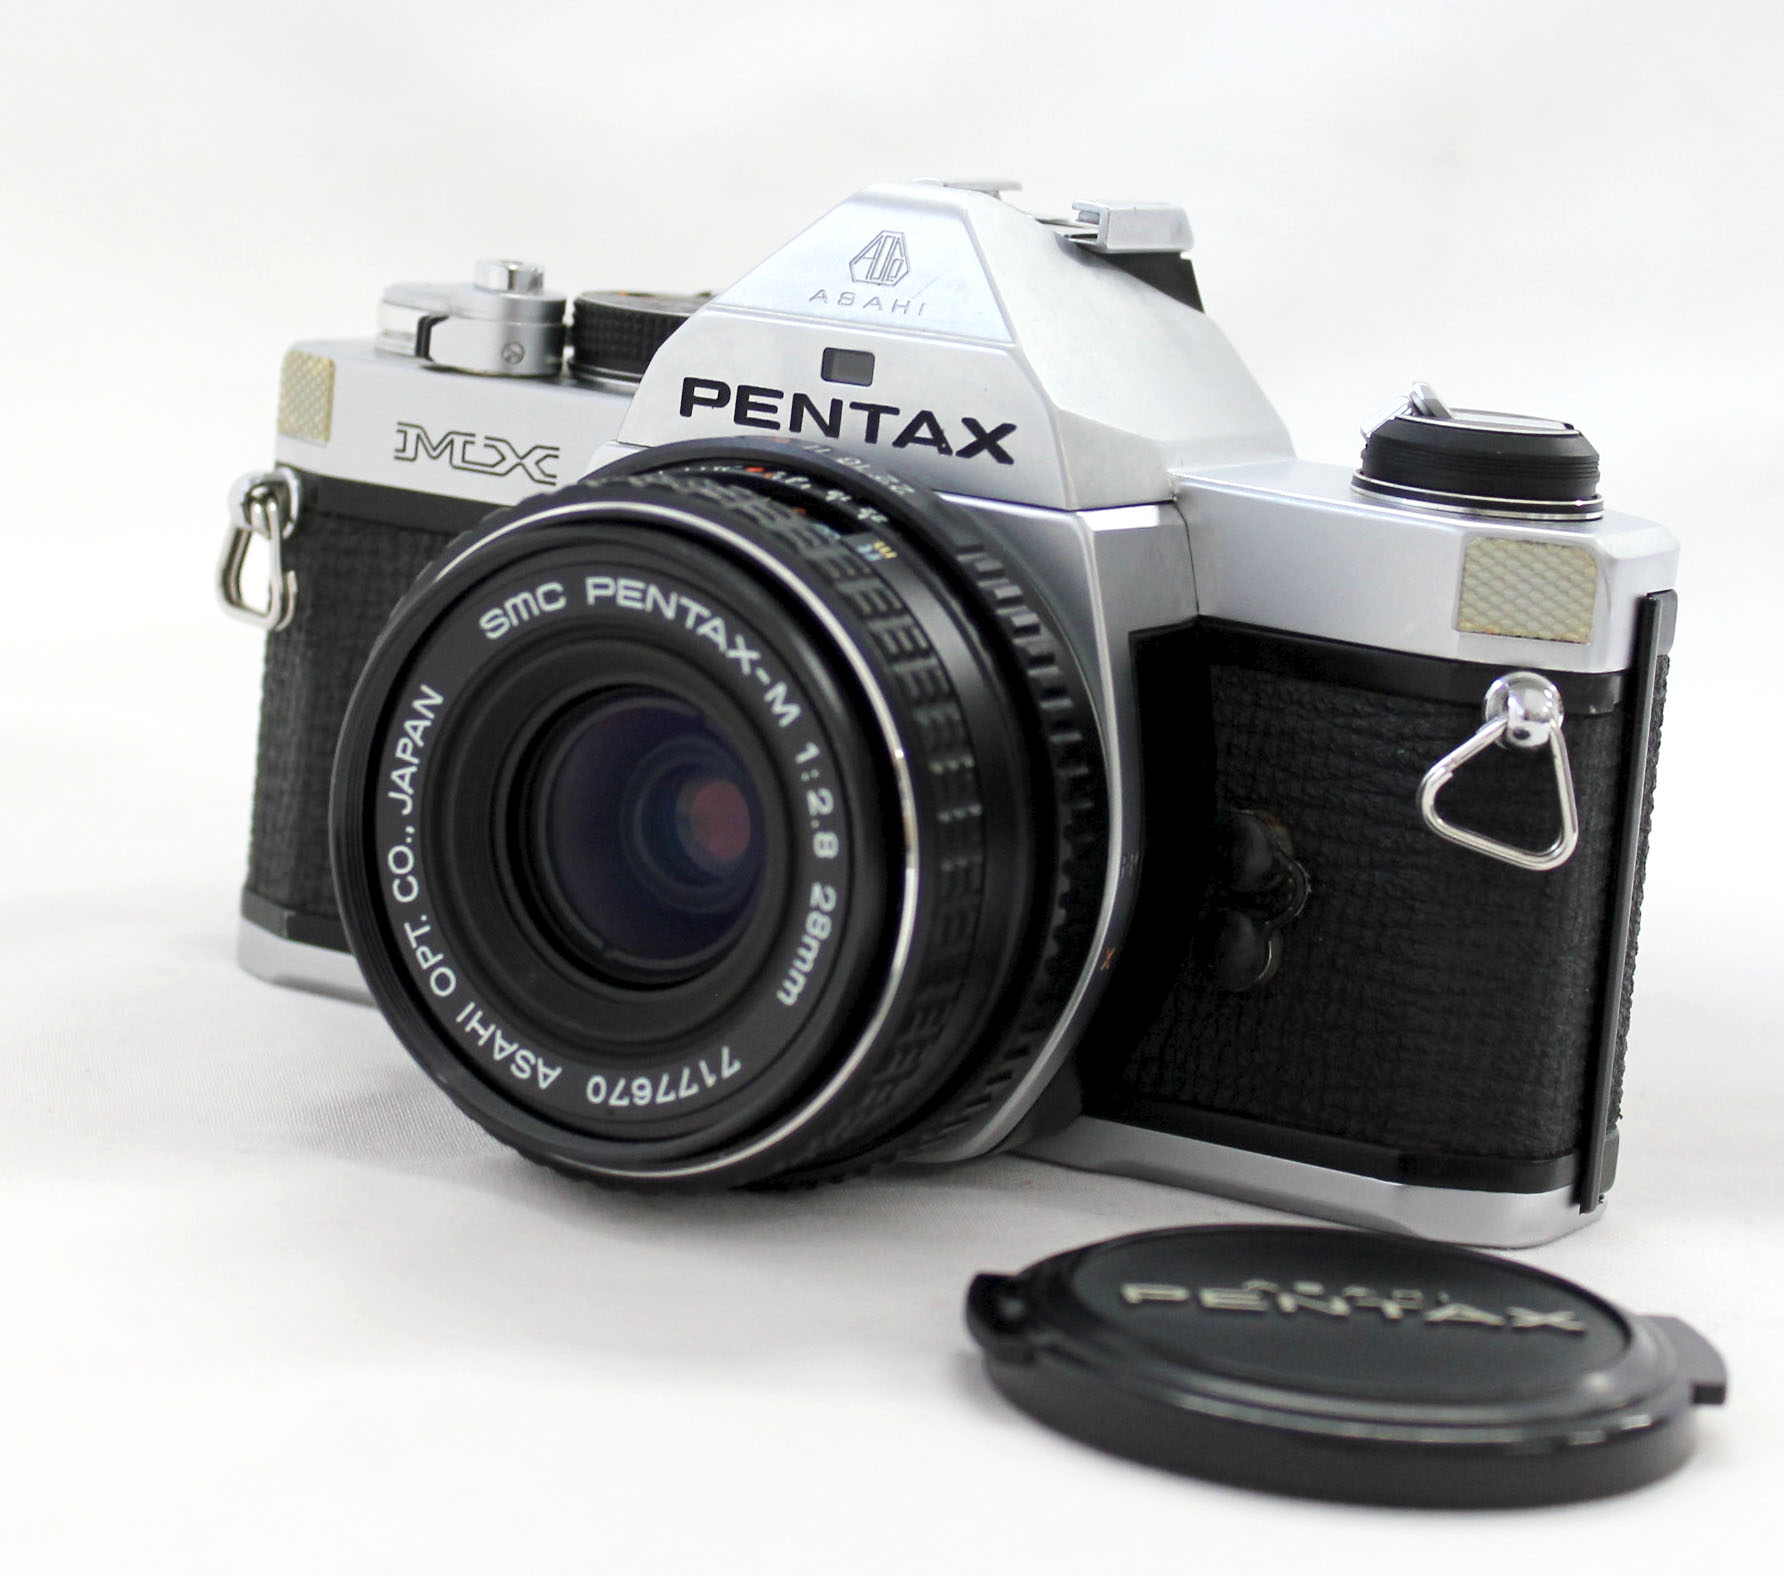 Japan Used Camera Shop | [Excellent++++] Pentax MX 35mm SLR Film Camera with SMC Pentax-M 28mm F/2.8 Lens from Japan